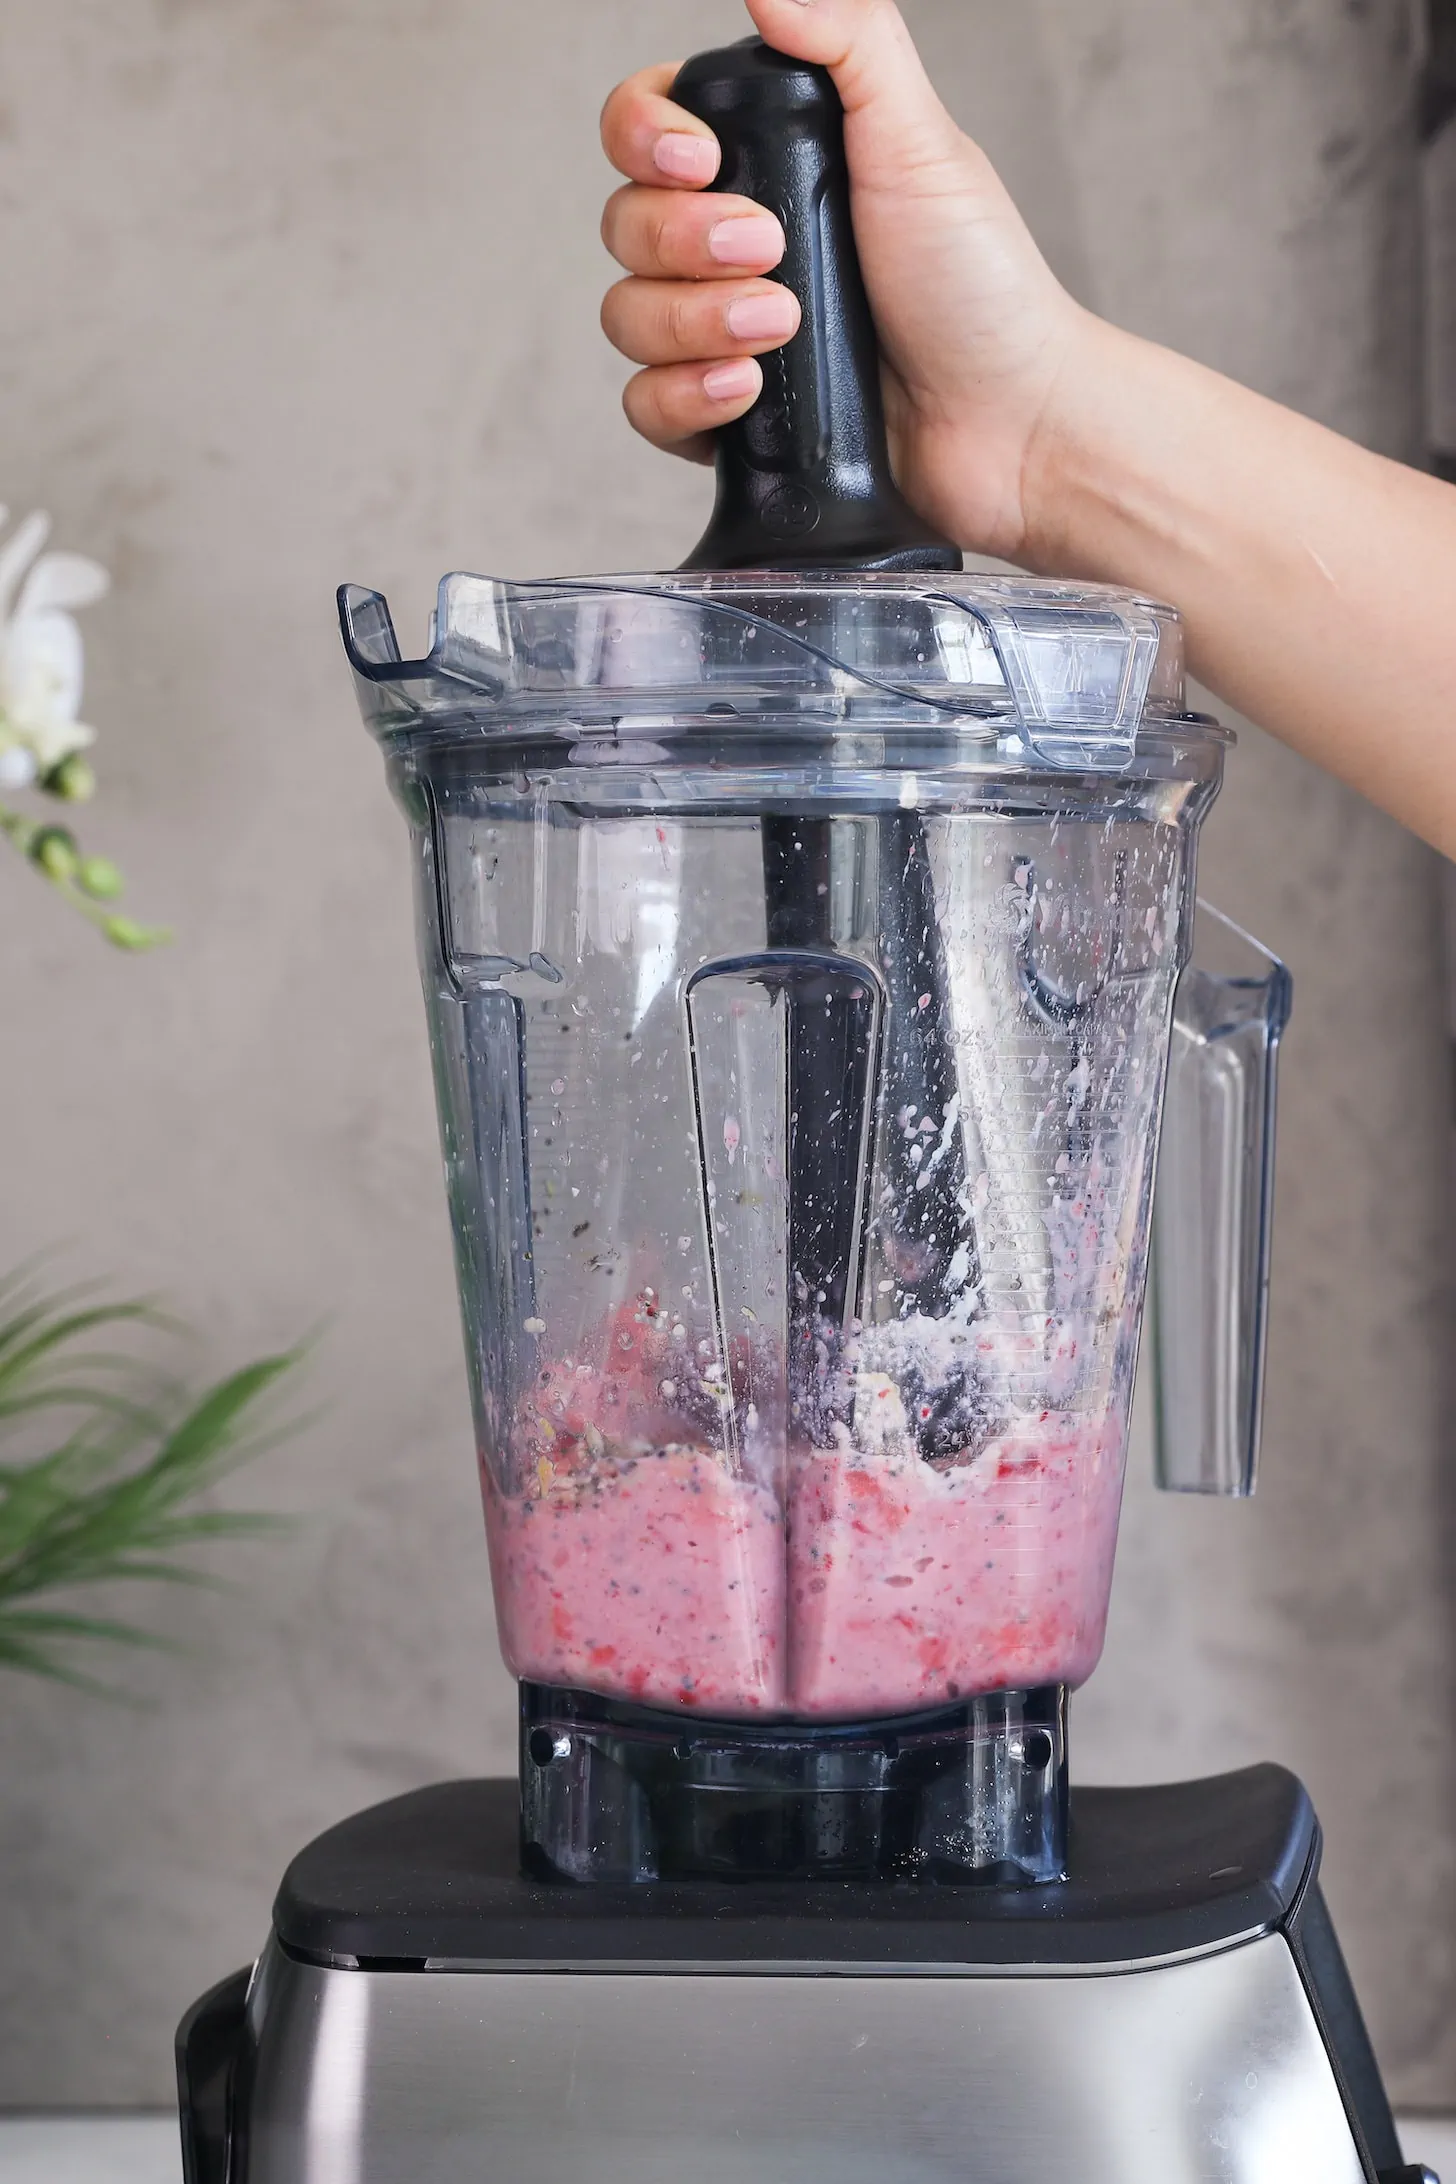 a hand holding a tamper stirring a pink mixture in a blender.